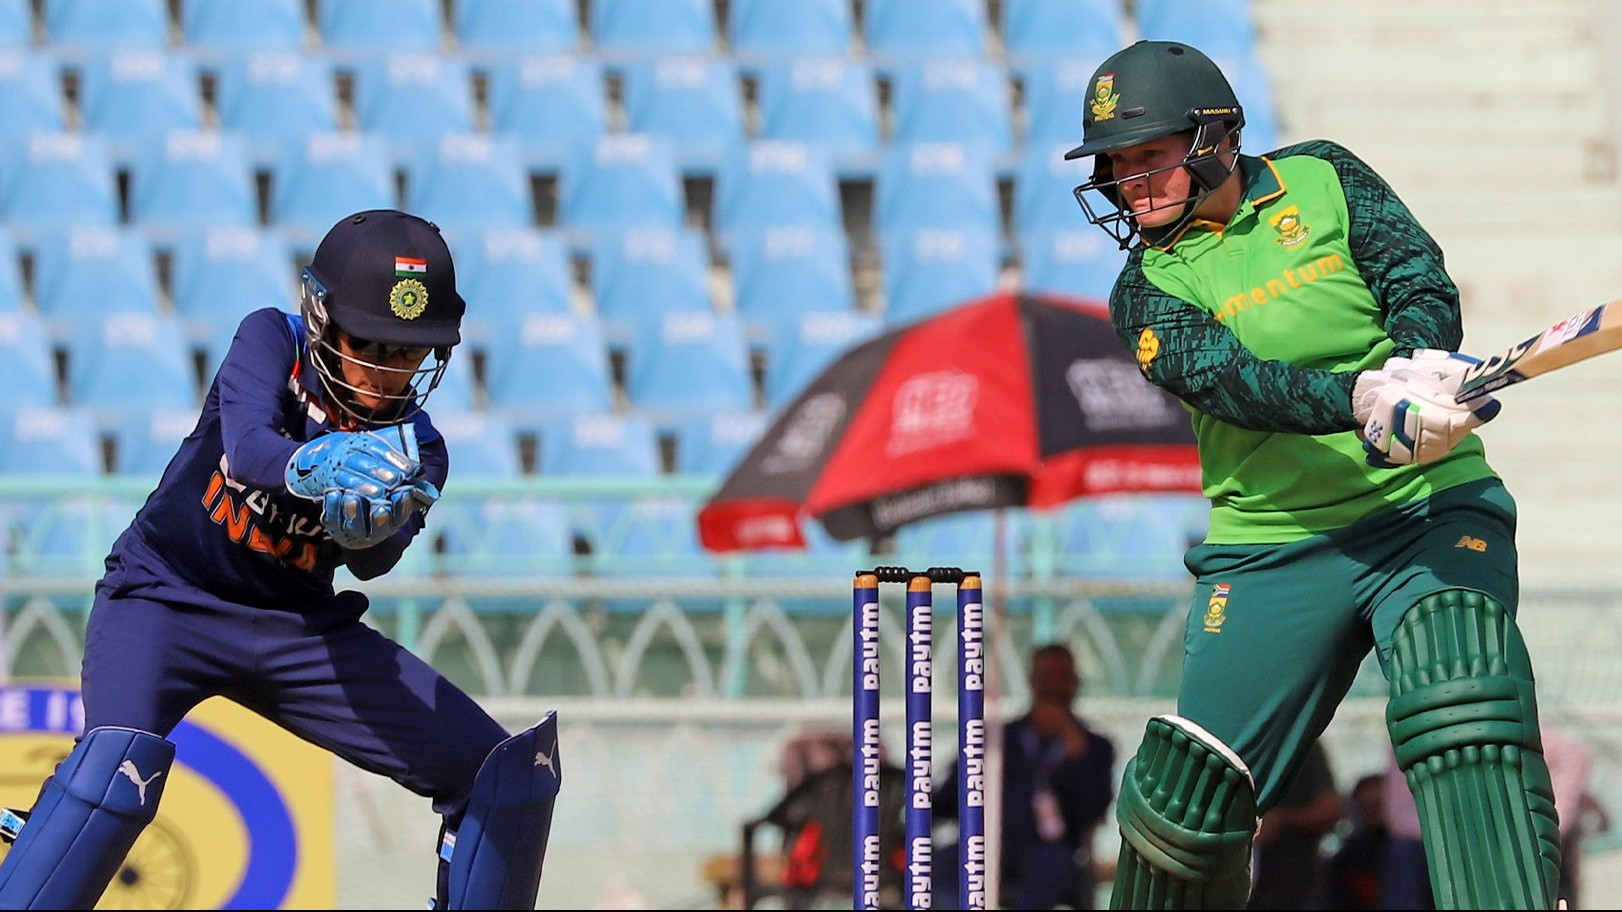 INDW v SAW 2021: South Africa women win rain-affected ODI by 6 runs thanks to Lizelle Lee’s 132*